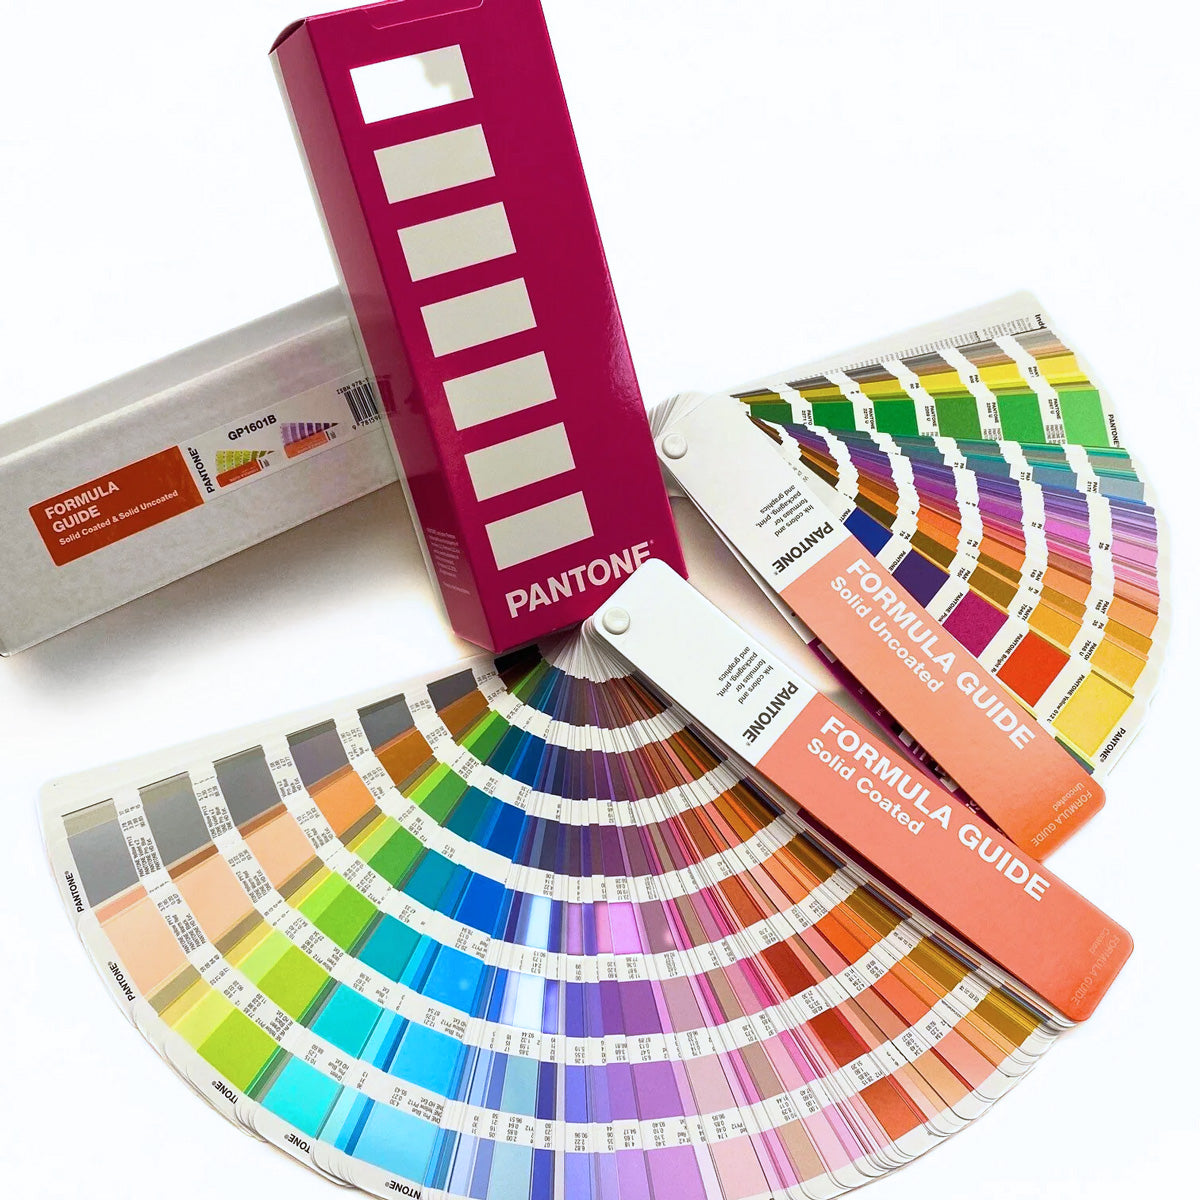 New PANTONE fans with wrong colour formulations